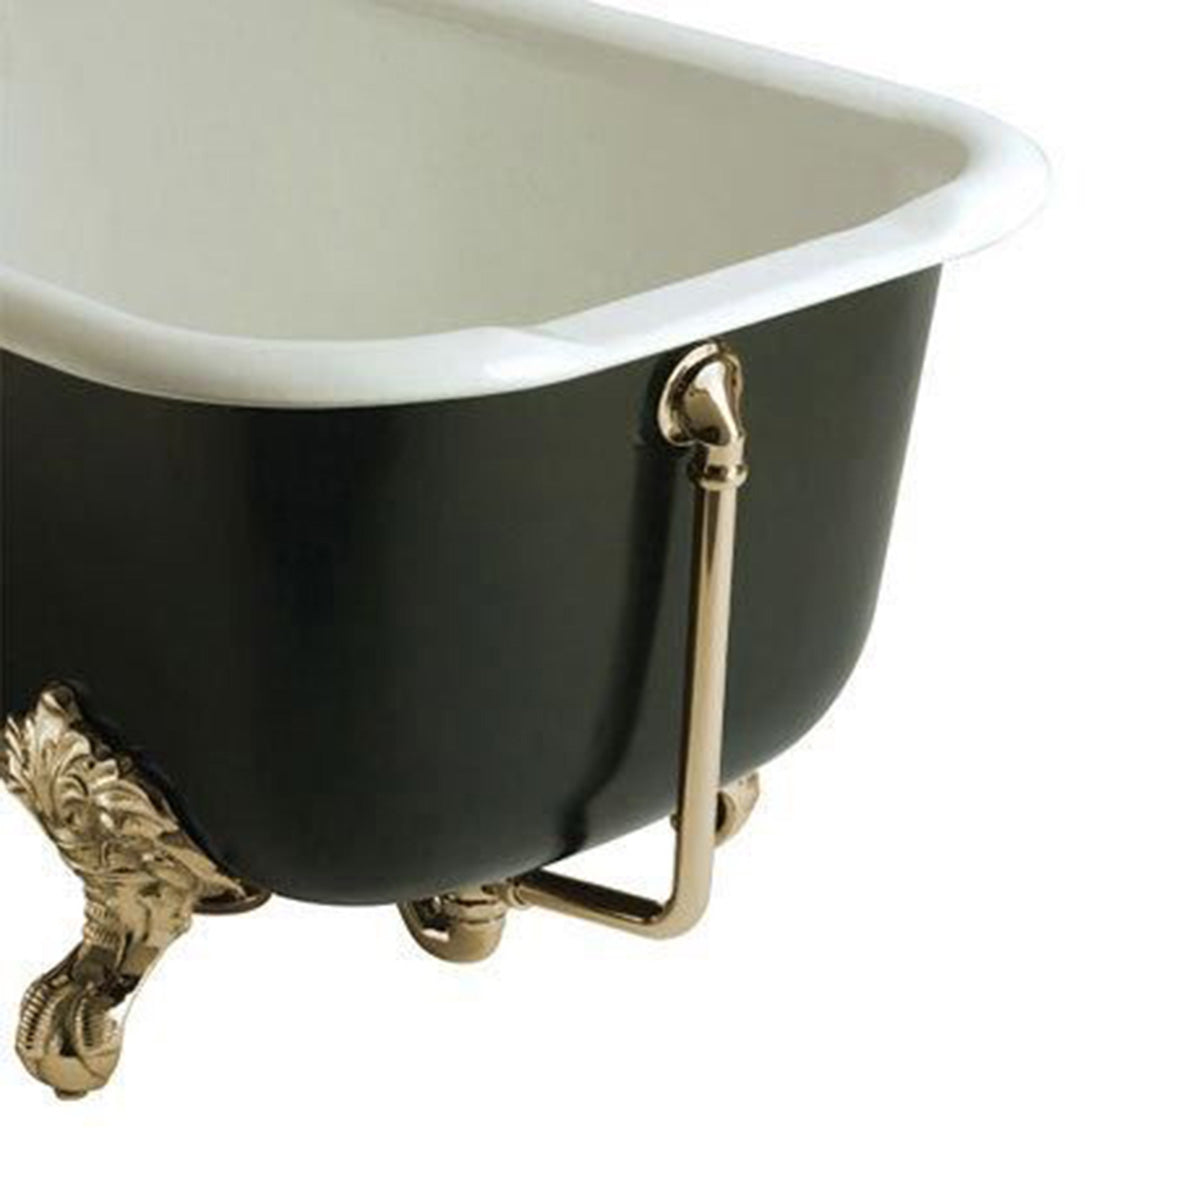 Heritage Exposed Bath Waste and Overflow Vintage Gold